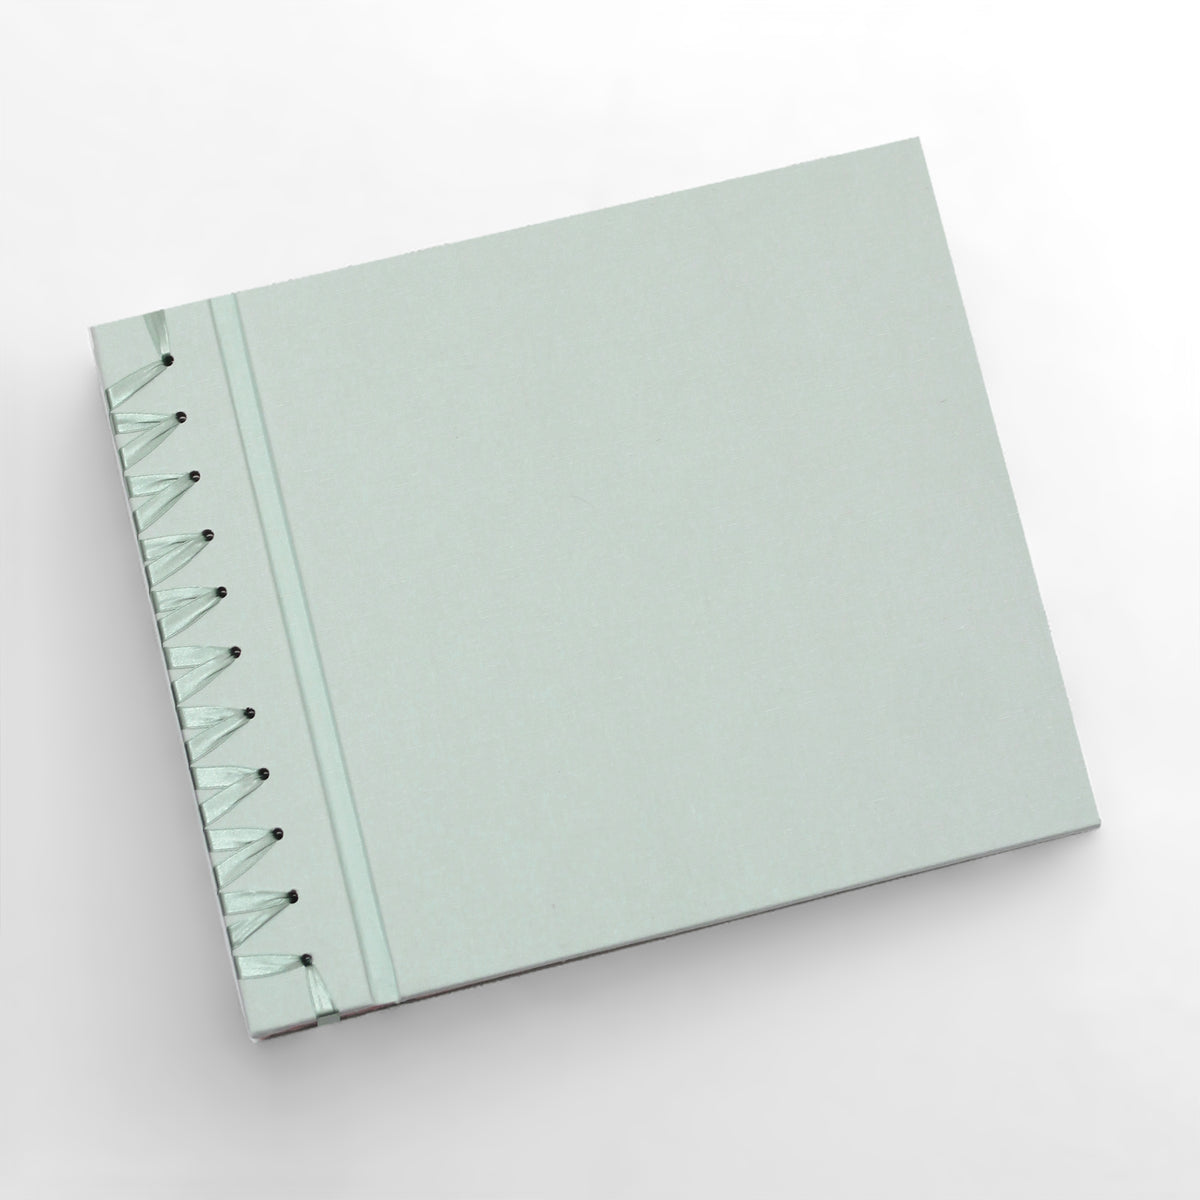 12 x 15 Deluxe Album with Pastel Blue Cotton Cover